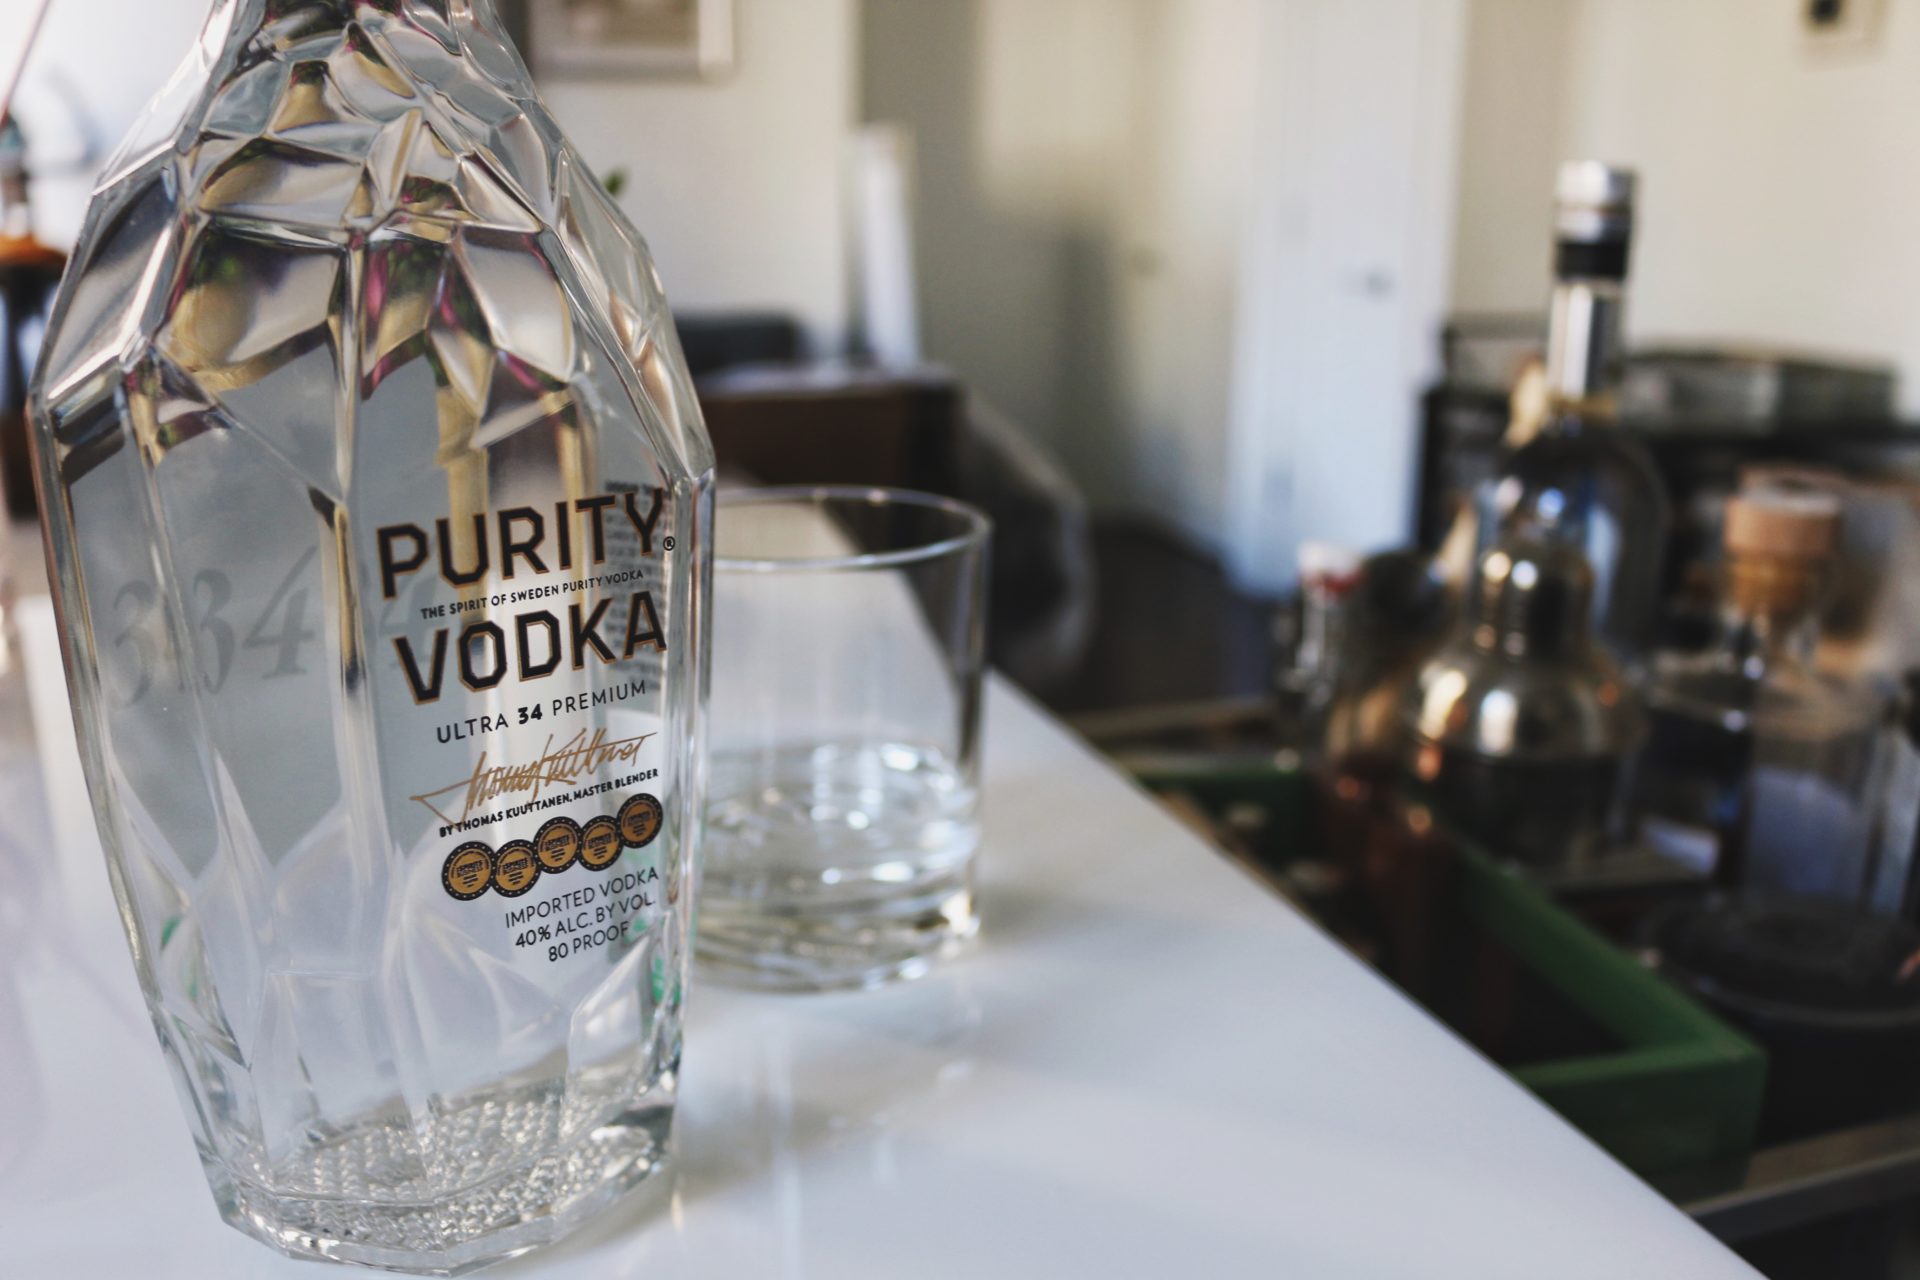 WHAT IS PURITY VODKA - dandy in the bronx